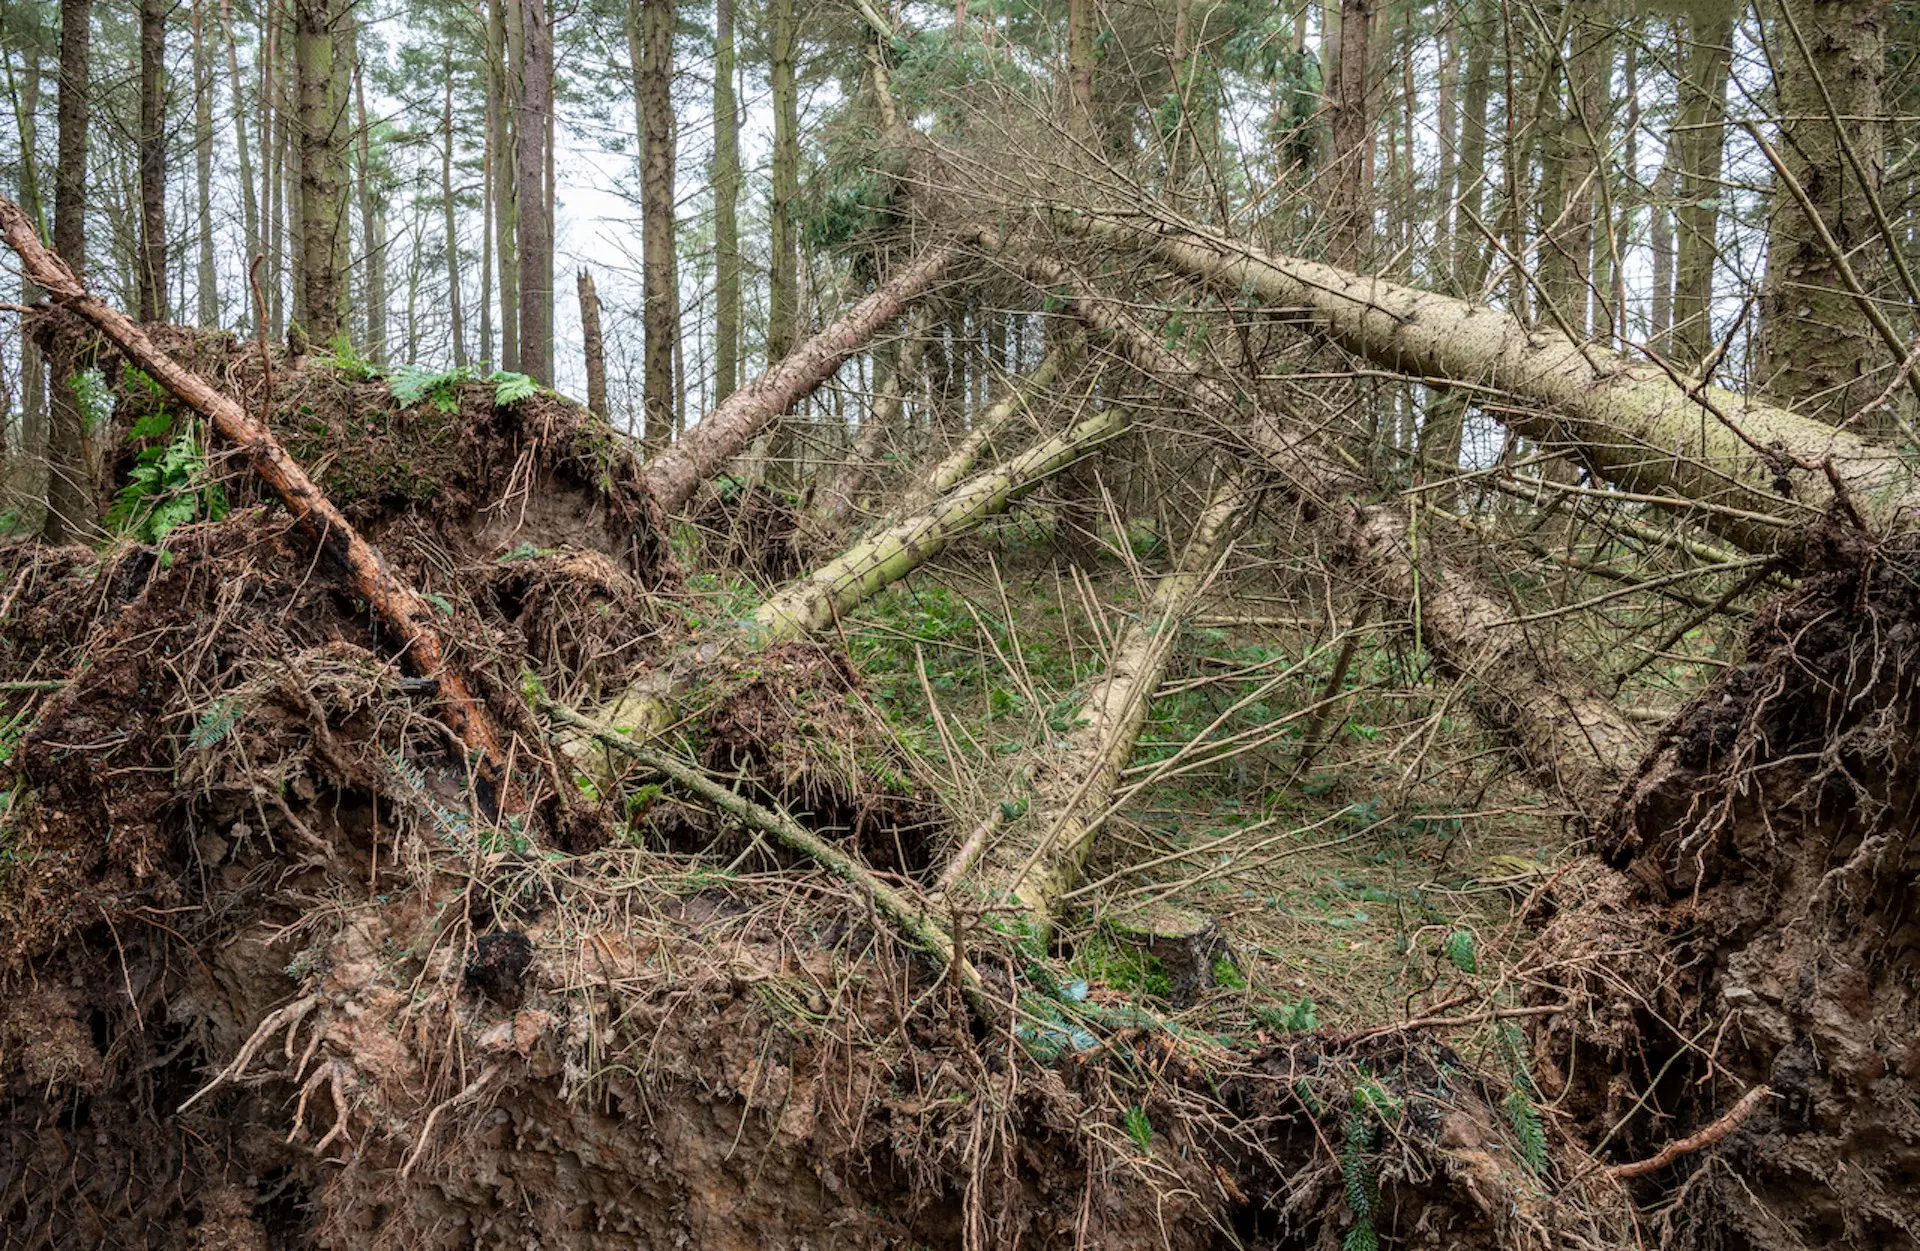 Why a 'tree's job isn't done' after a storm brings it down